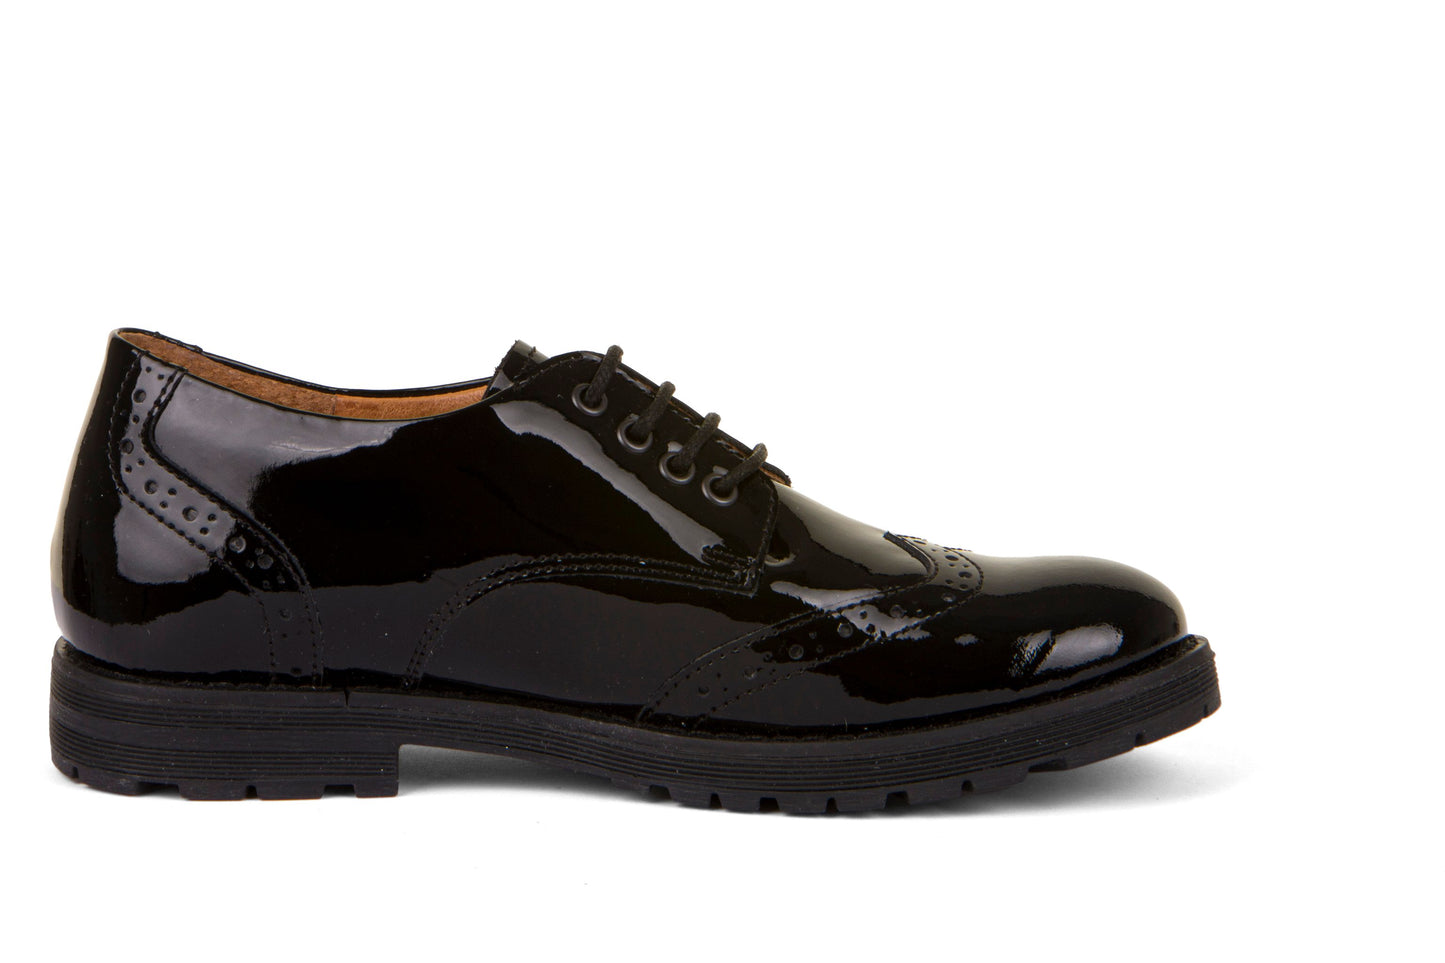 Froddo Black Patent leather Brogue lace up School Shoes